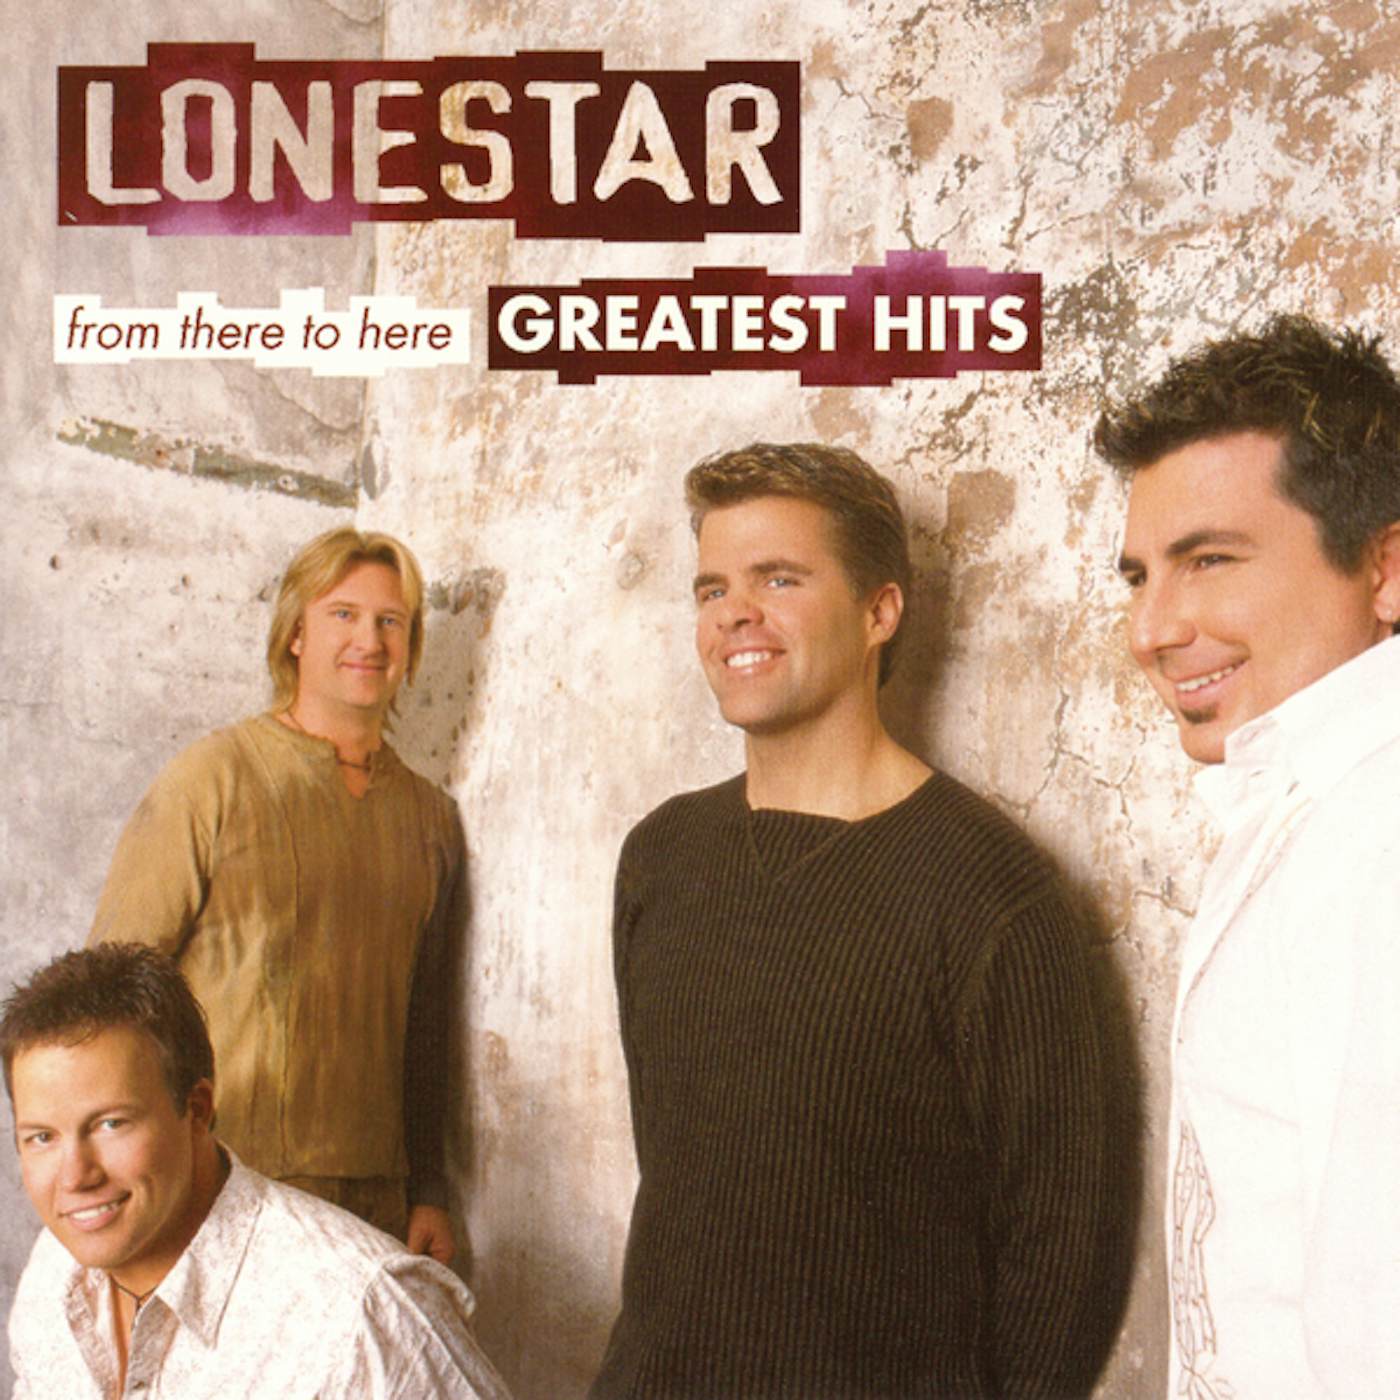 Lonestar From There to Here: Greatest Hits CD